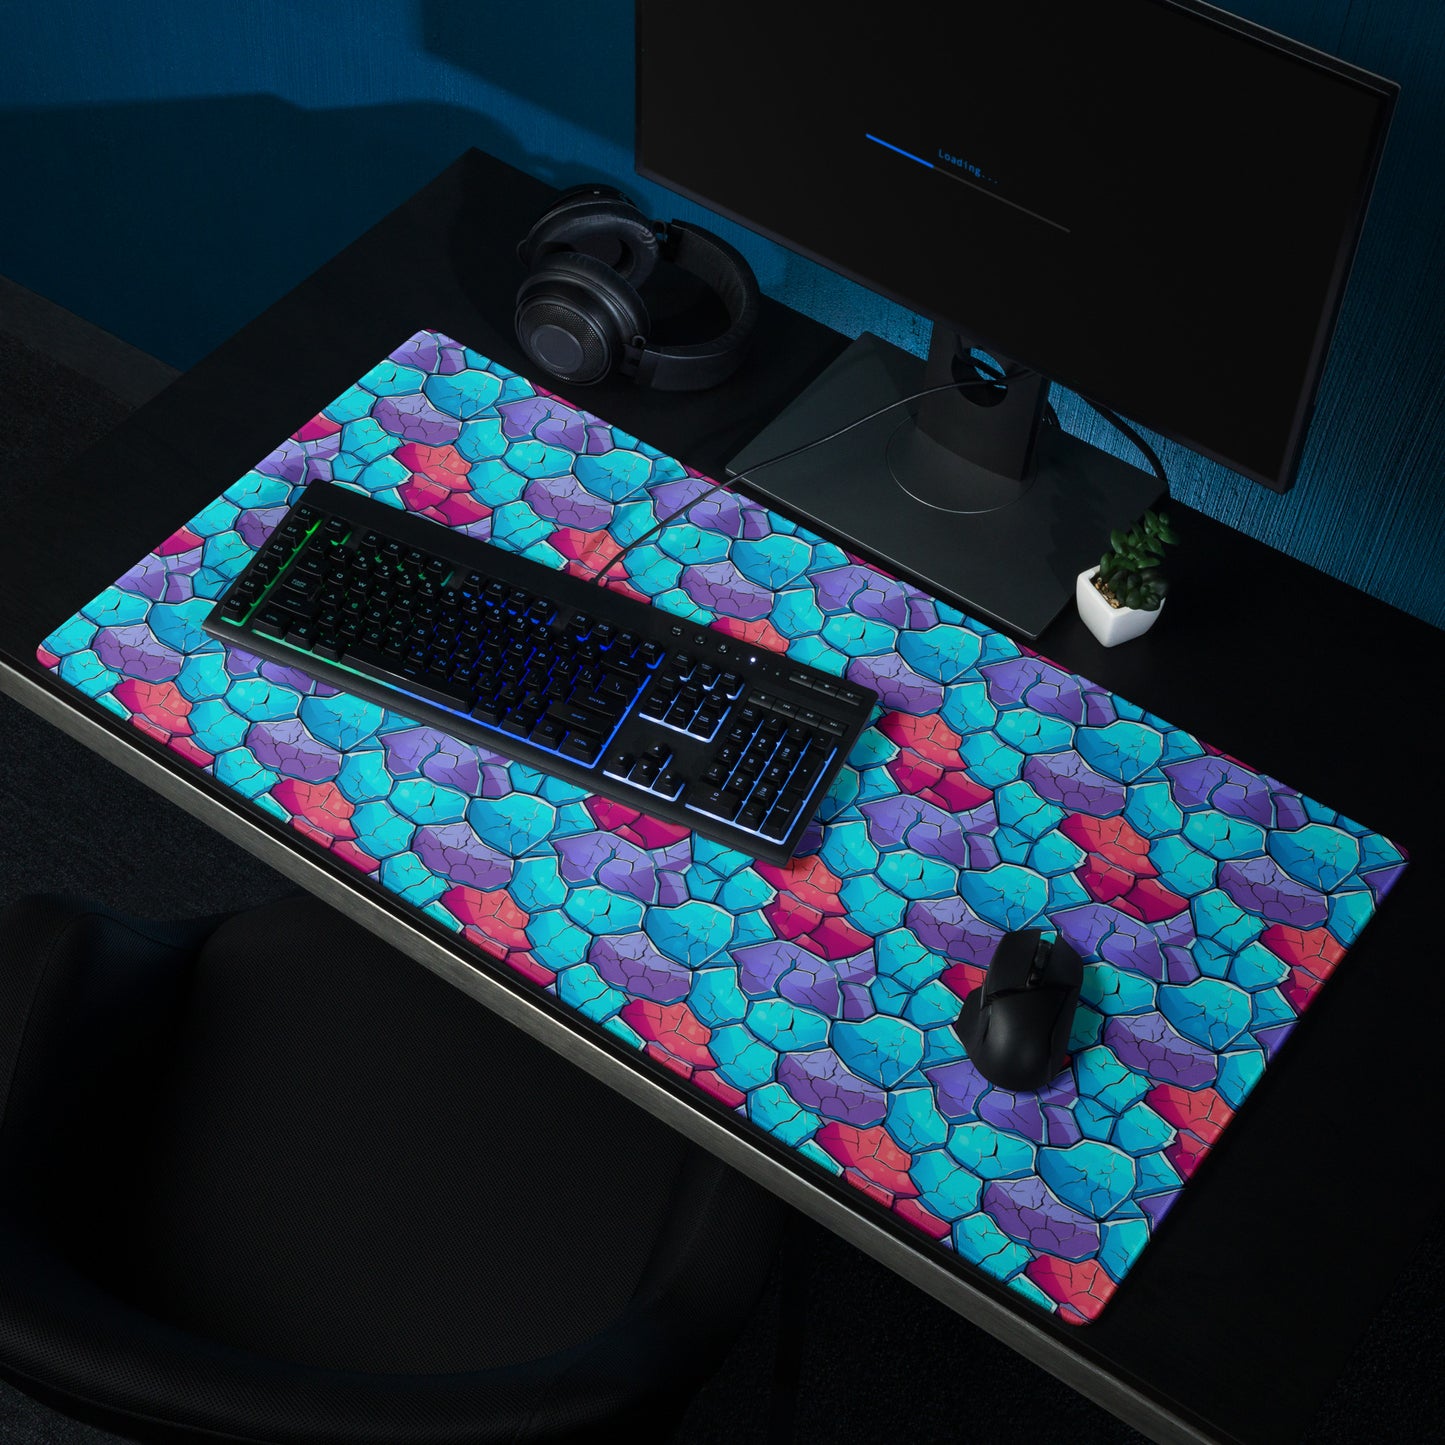 A 36" x 18" gaming desk pad with blue, red, and purple crystals. It sits on a black desk with a keyboard, monitor, and mouse.